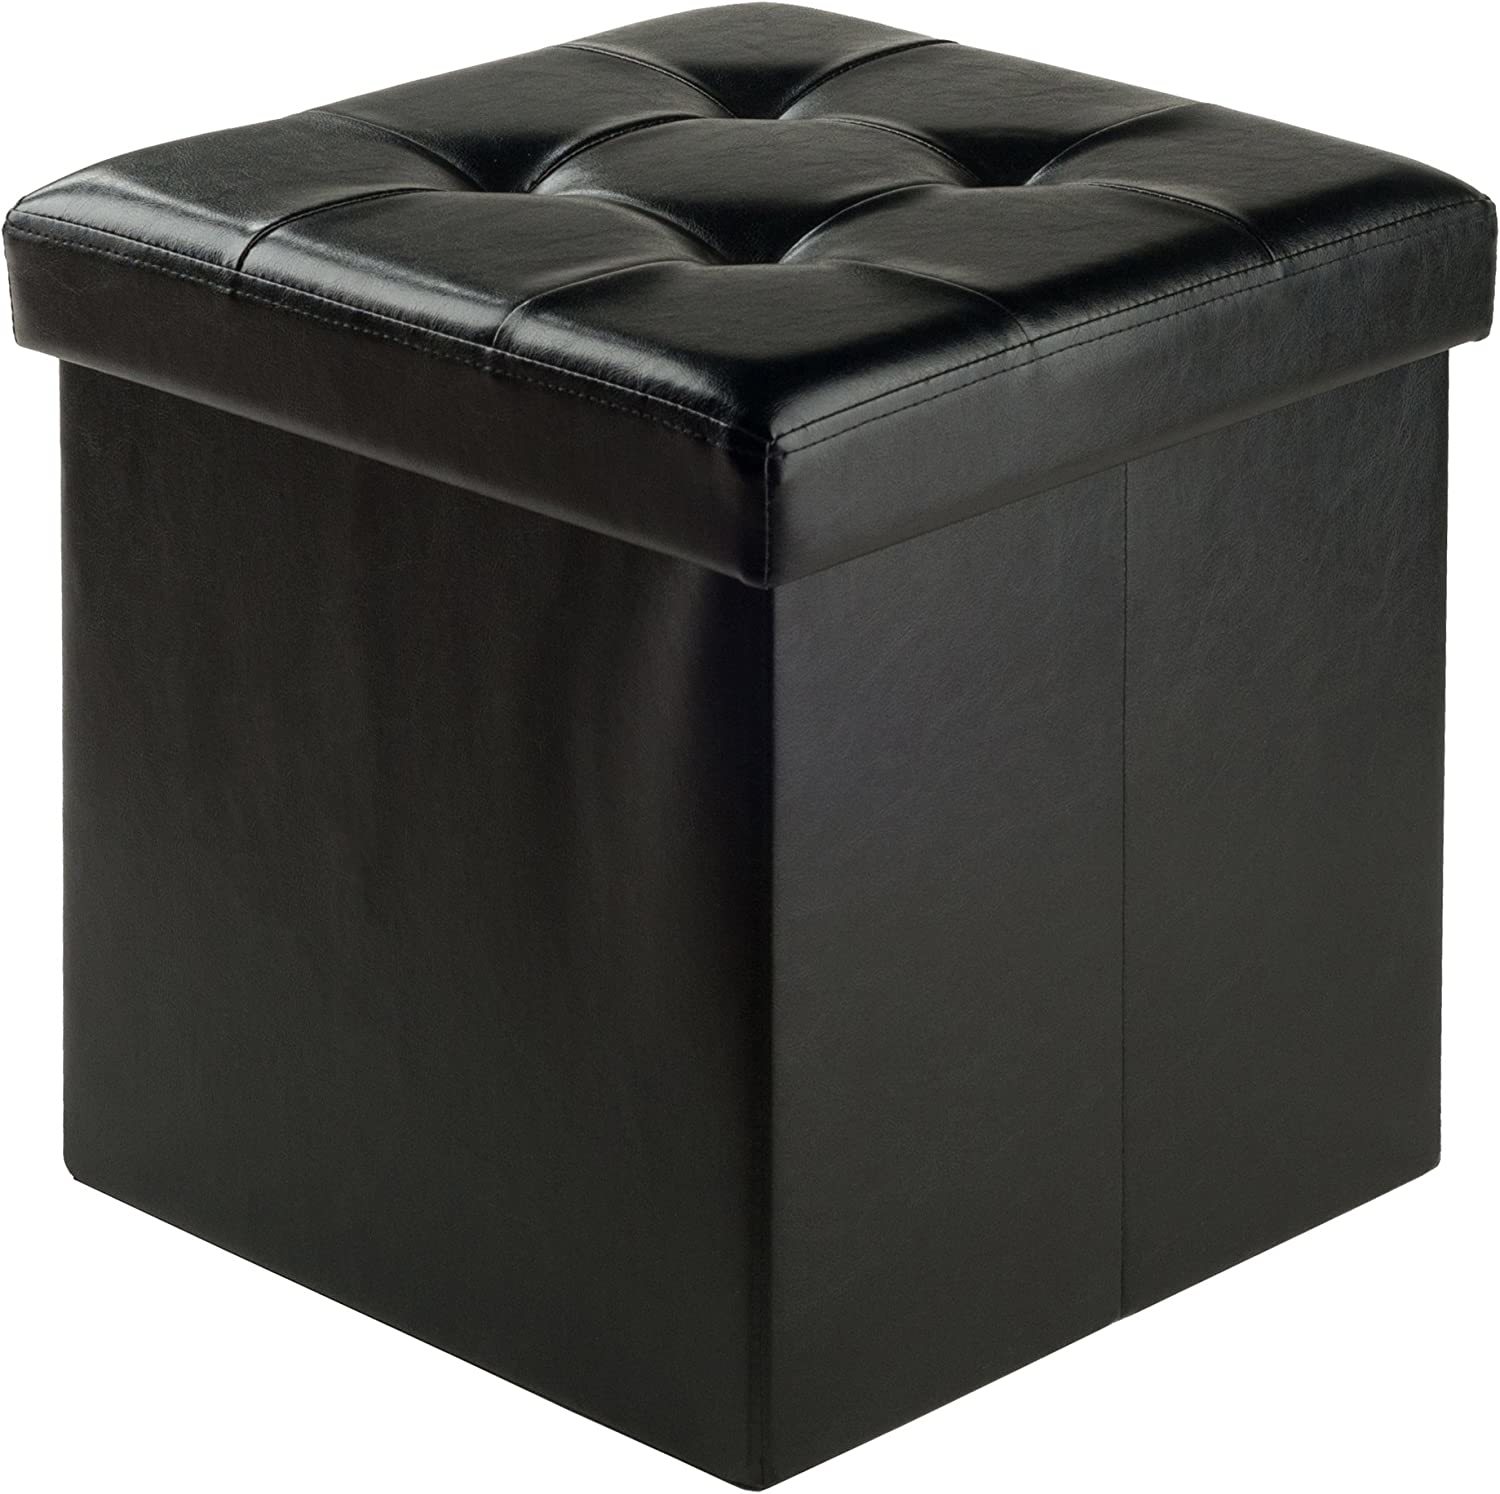 Winsome Wood Furniture Piece Ashford Ottoman With Storage Faux Leather, Black - $36.99